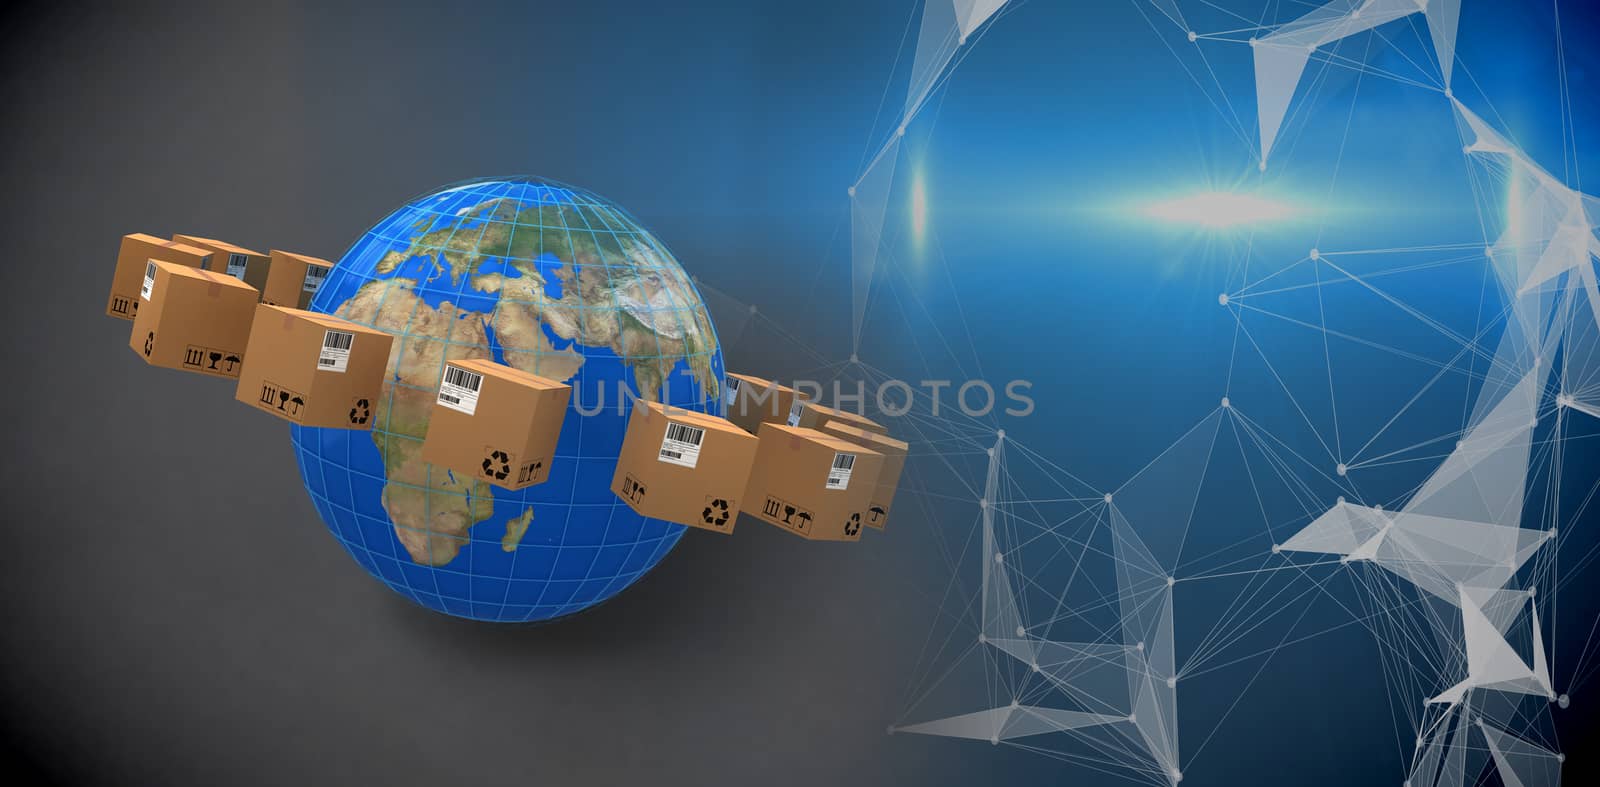 World map amidst cardboard boxes against digitally generated image of abstract pattern on screen